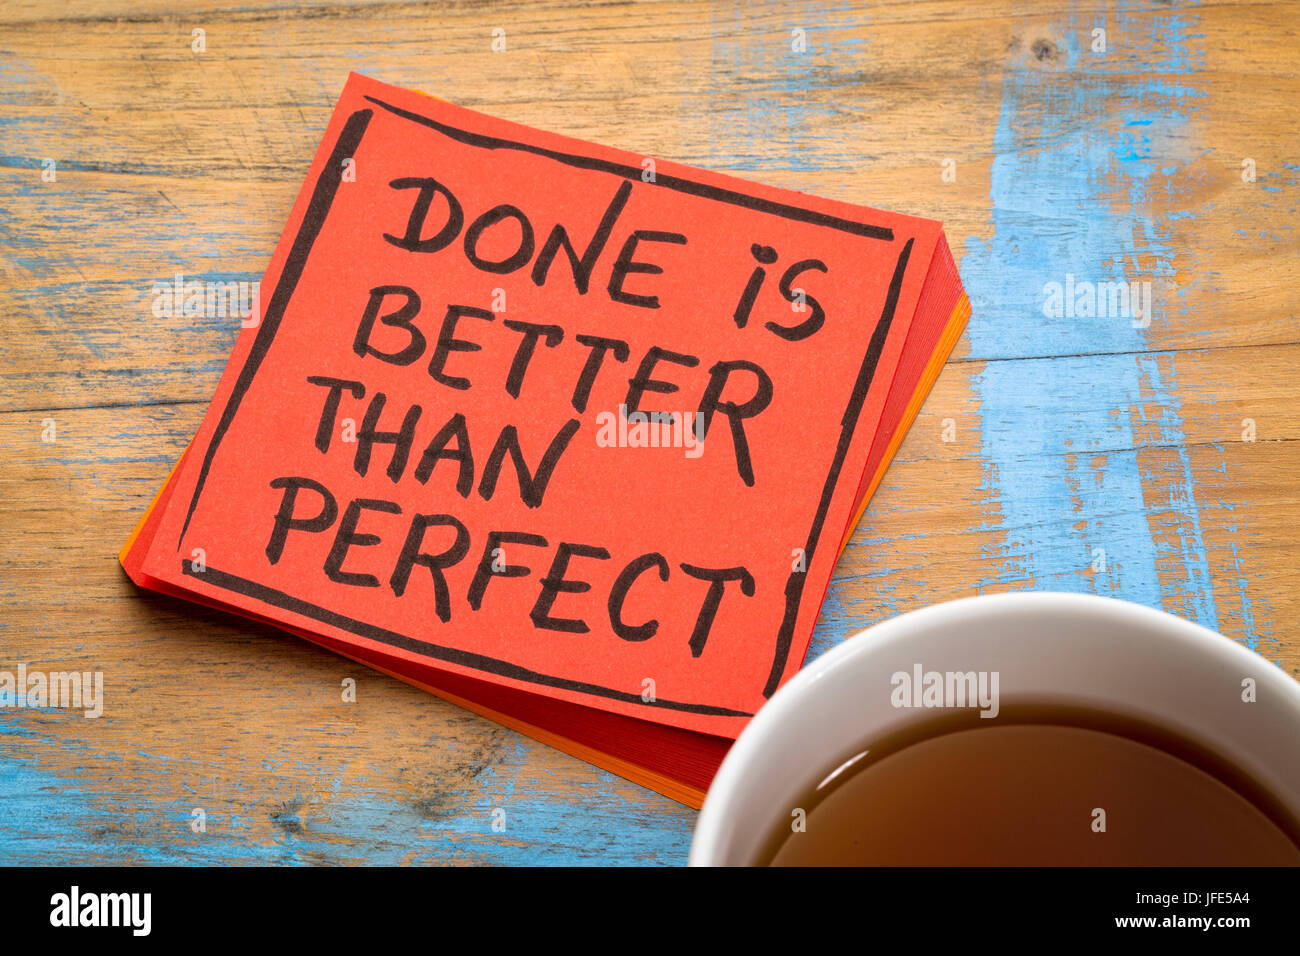 Done is better than perfect reminder - handwriting in black ink on colorful sticky notes against rustic wood Stock Photo